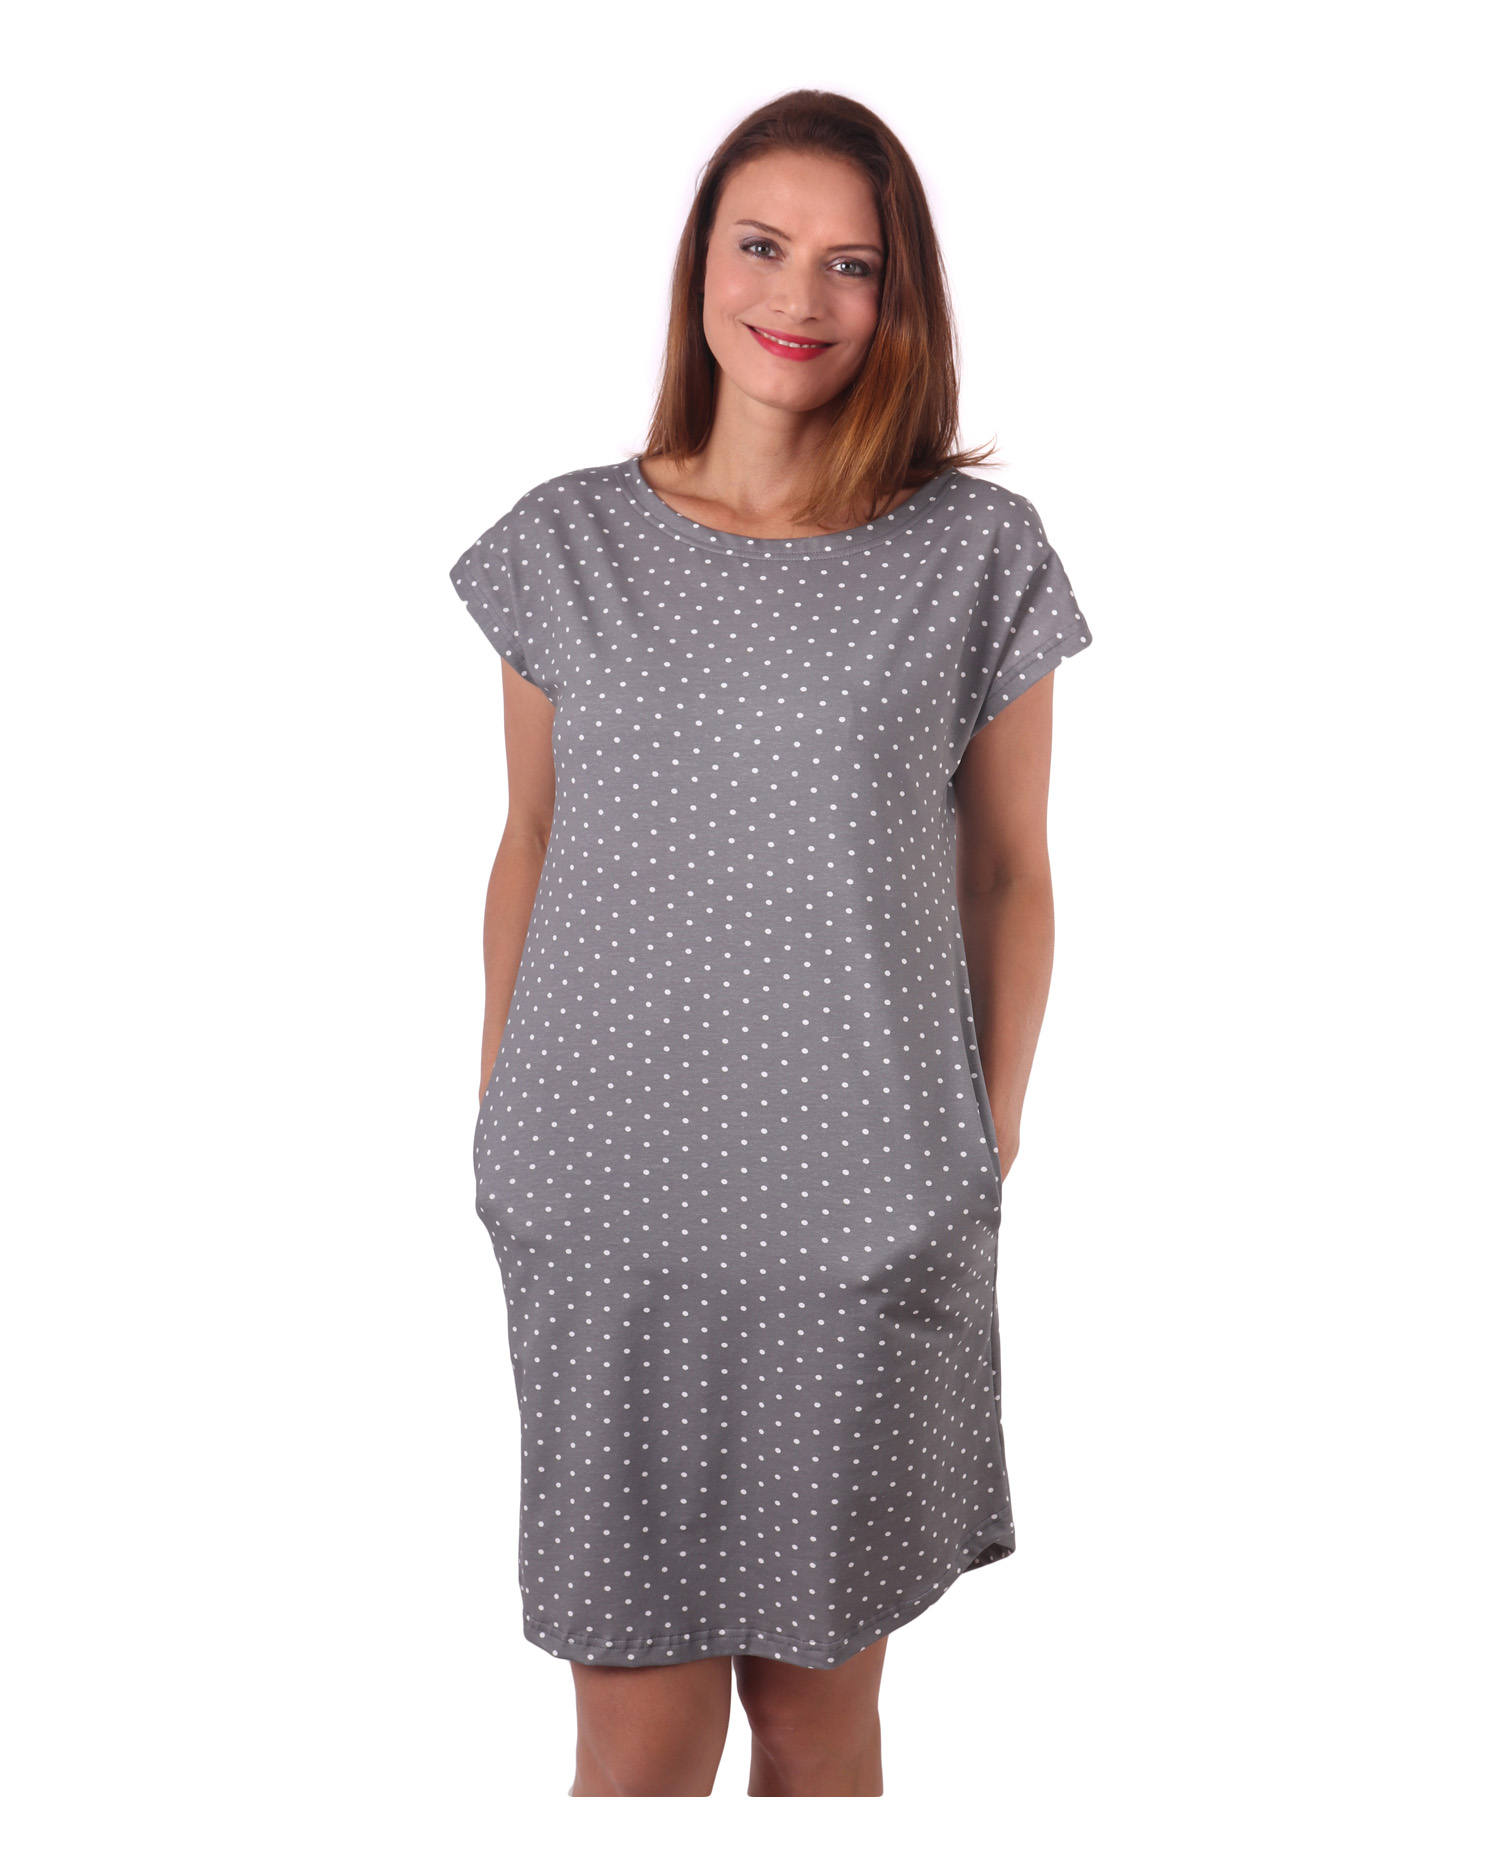 Women's dress with pockets Zoe, oversized loose fit, grey with dots